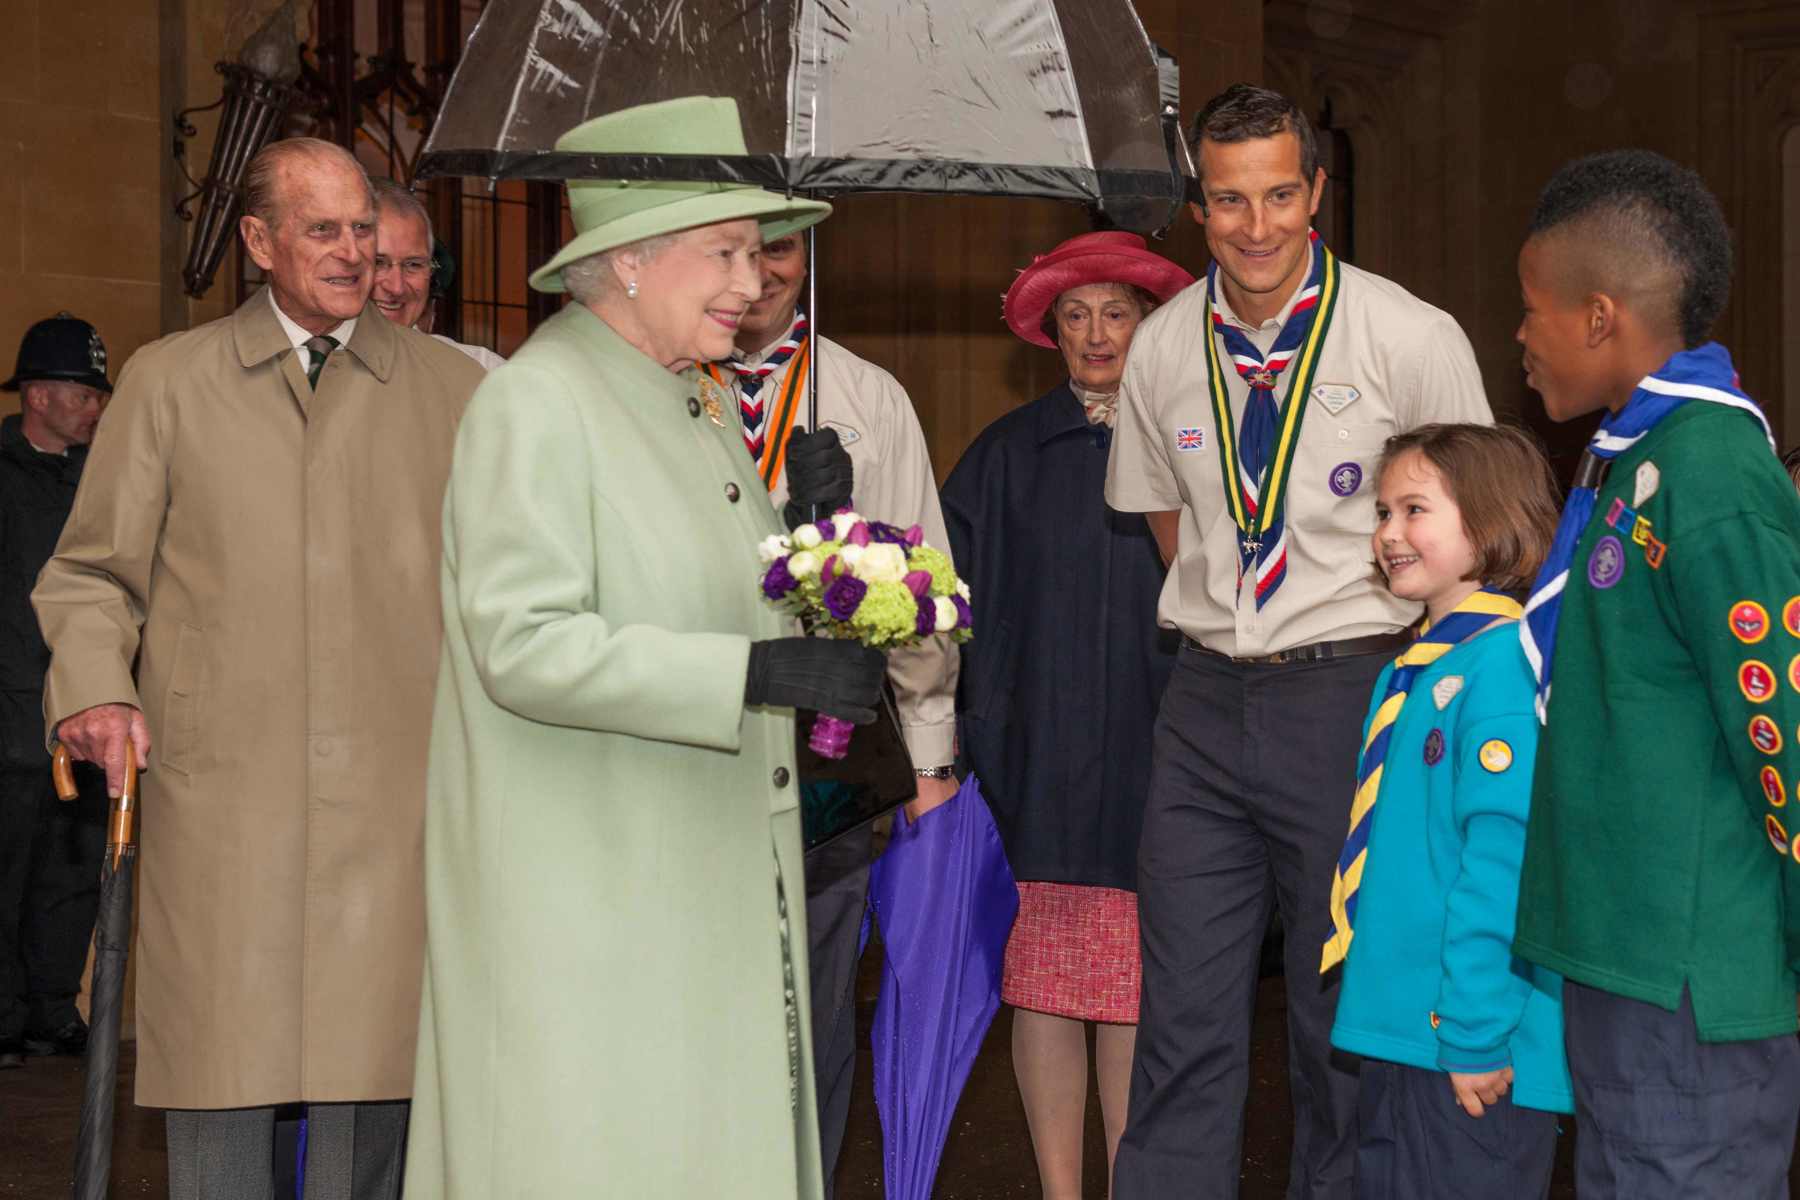 The Queen smiles at two young people while stood with Prince Philip and Bear Grylls.